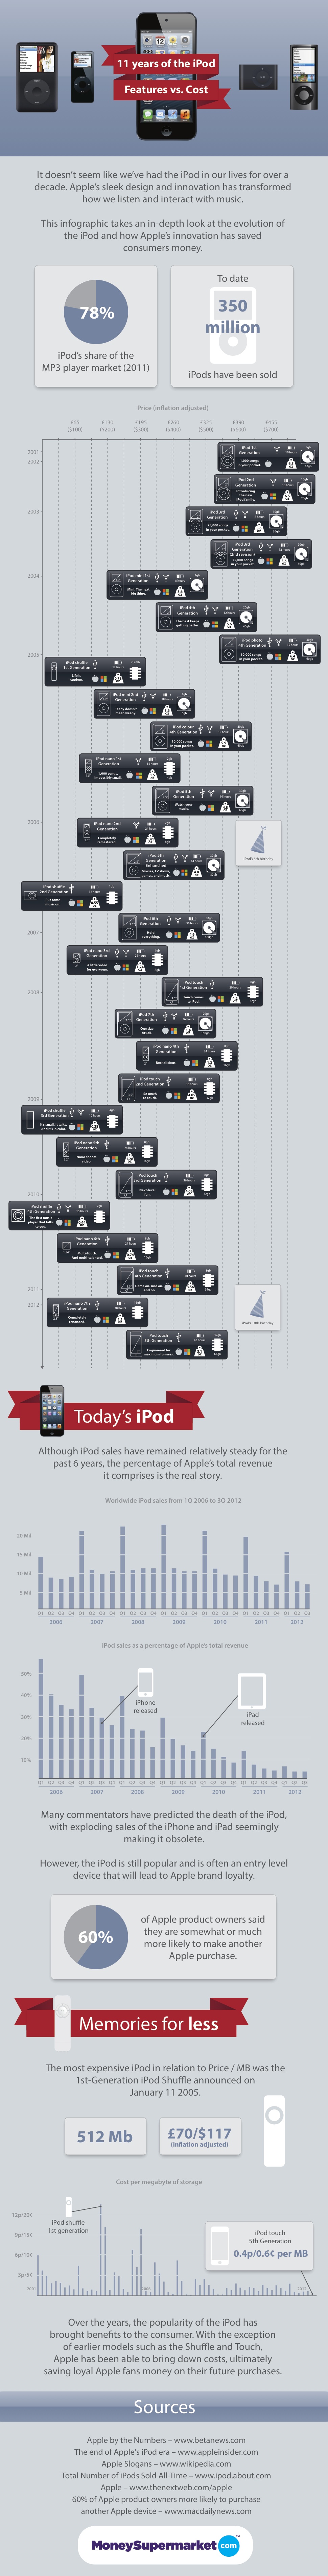 Infographic: The History Of The iPod - Eleven Years of Features and Cost